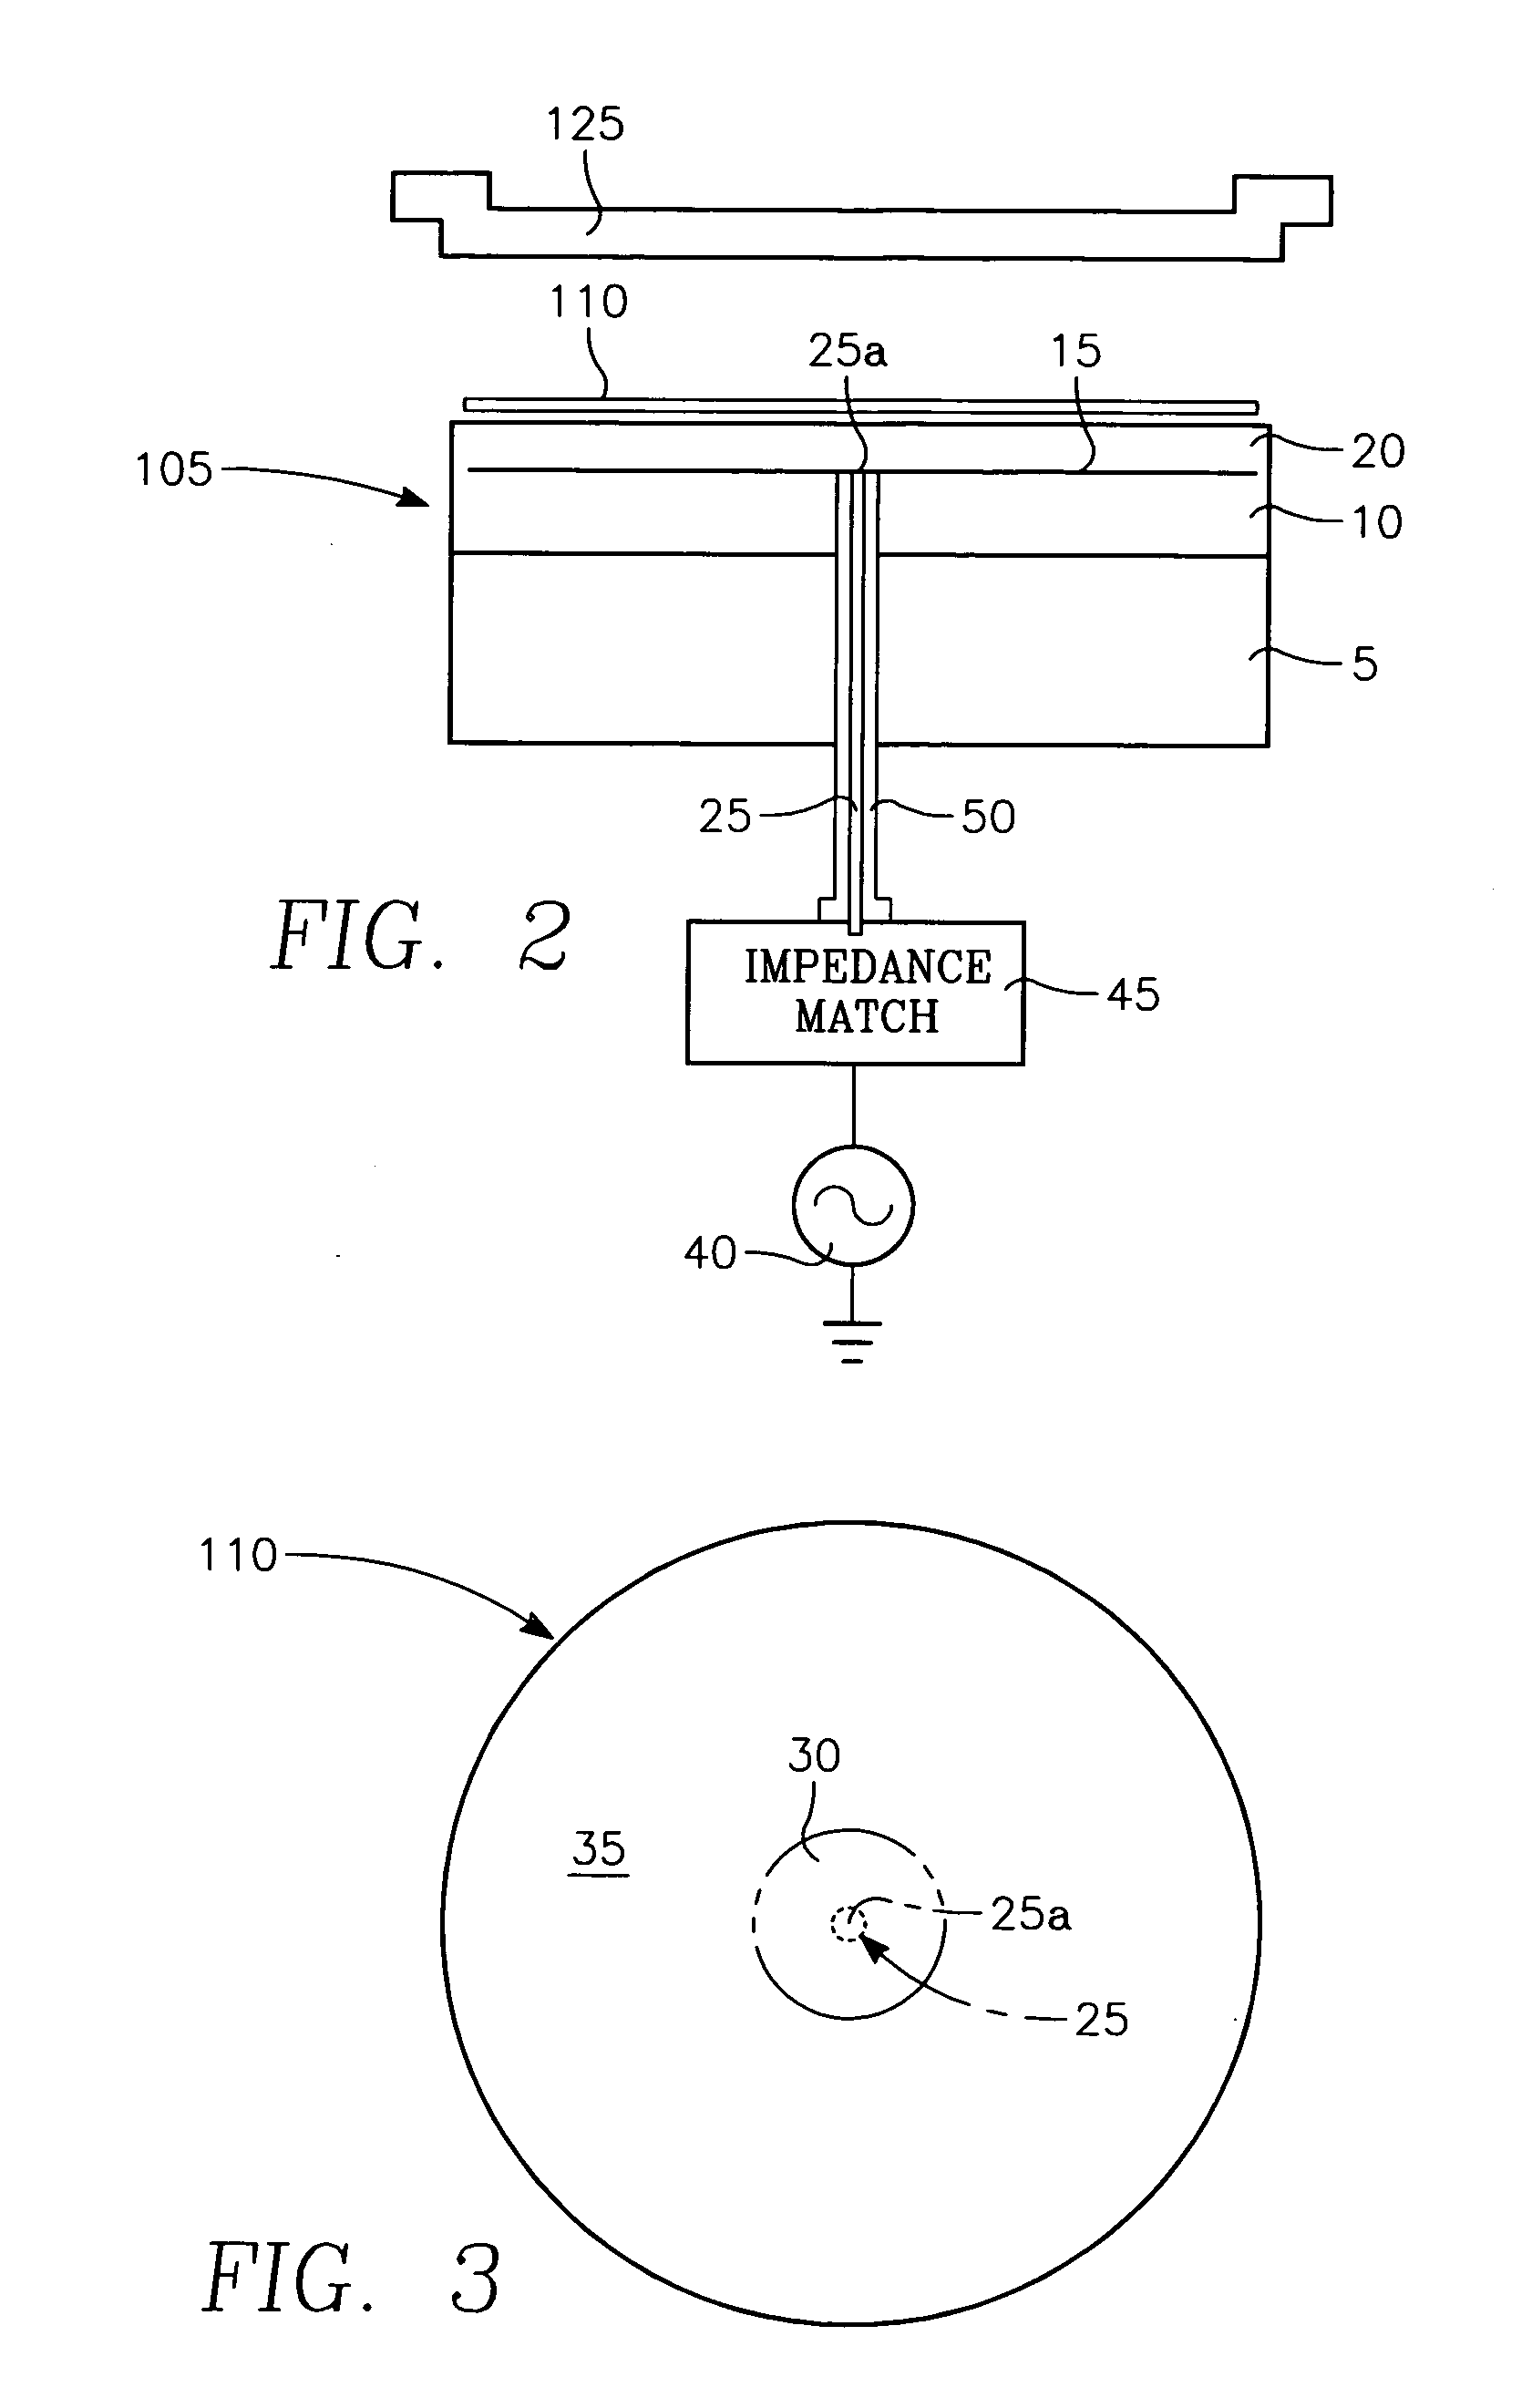 Plasma reactor with feed forward thermal control system using a thermal model for accommodating RF power changes or wafer temperature changes